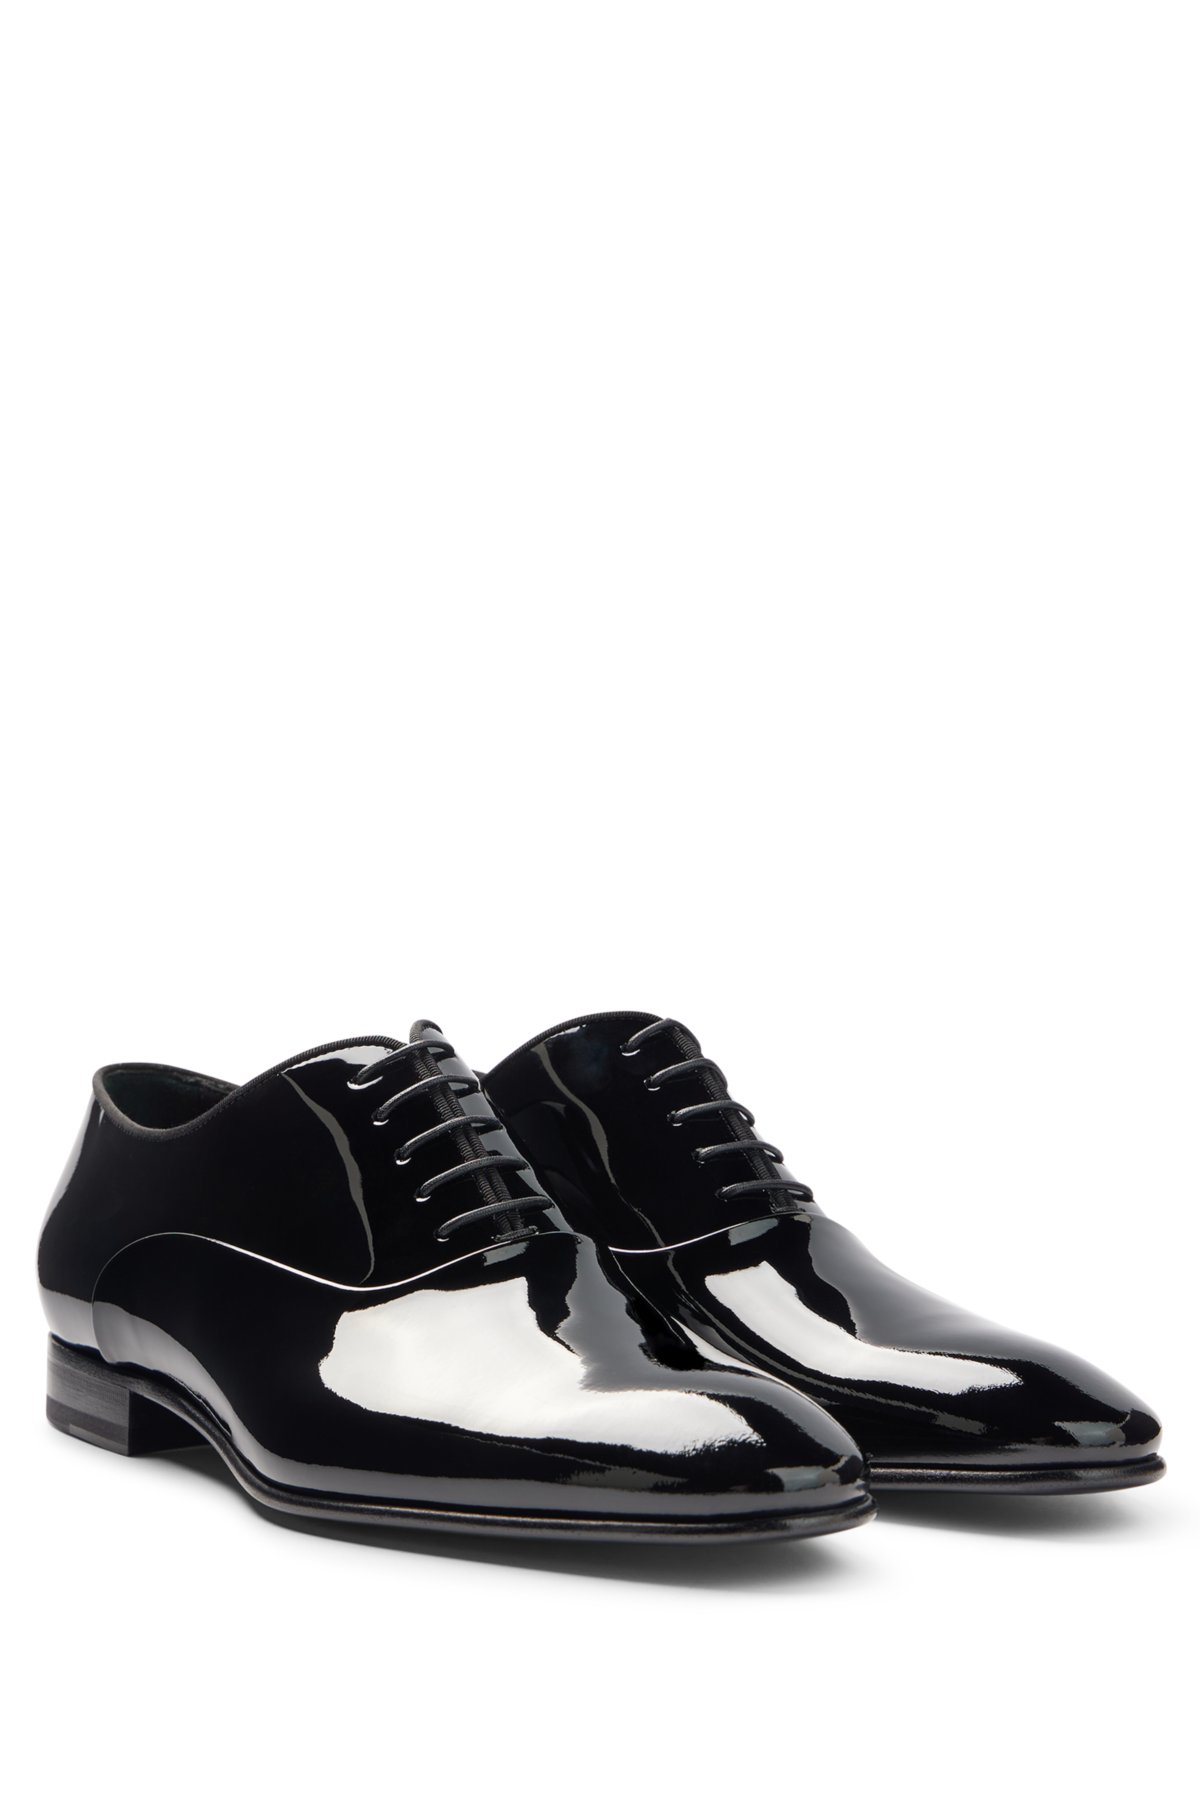 BOSS - Oxford shoes leather with grosgrain piping